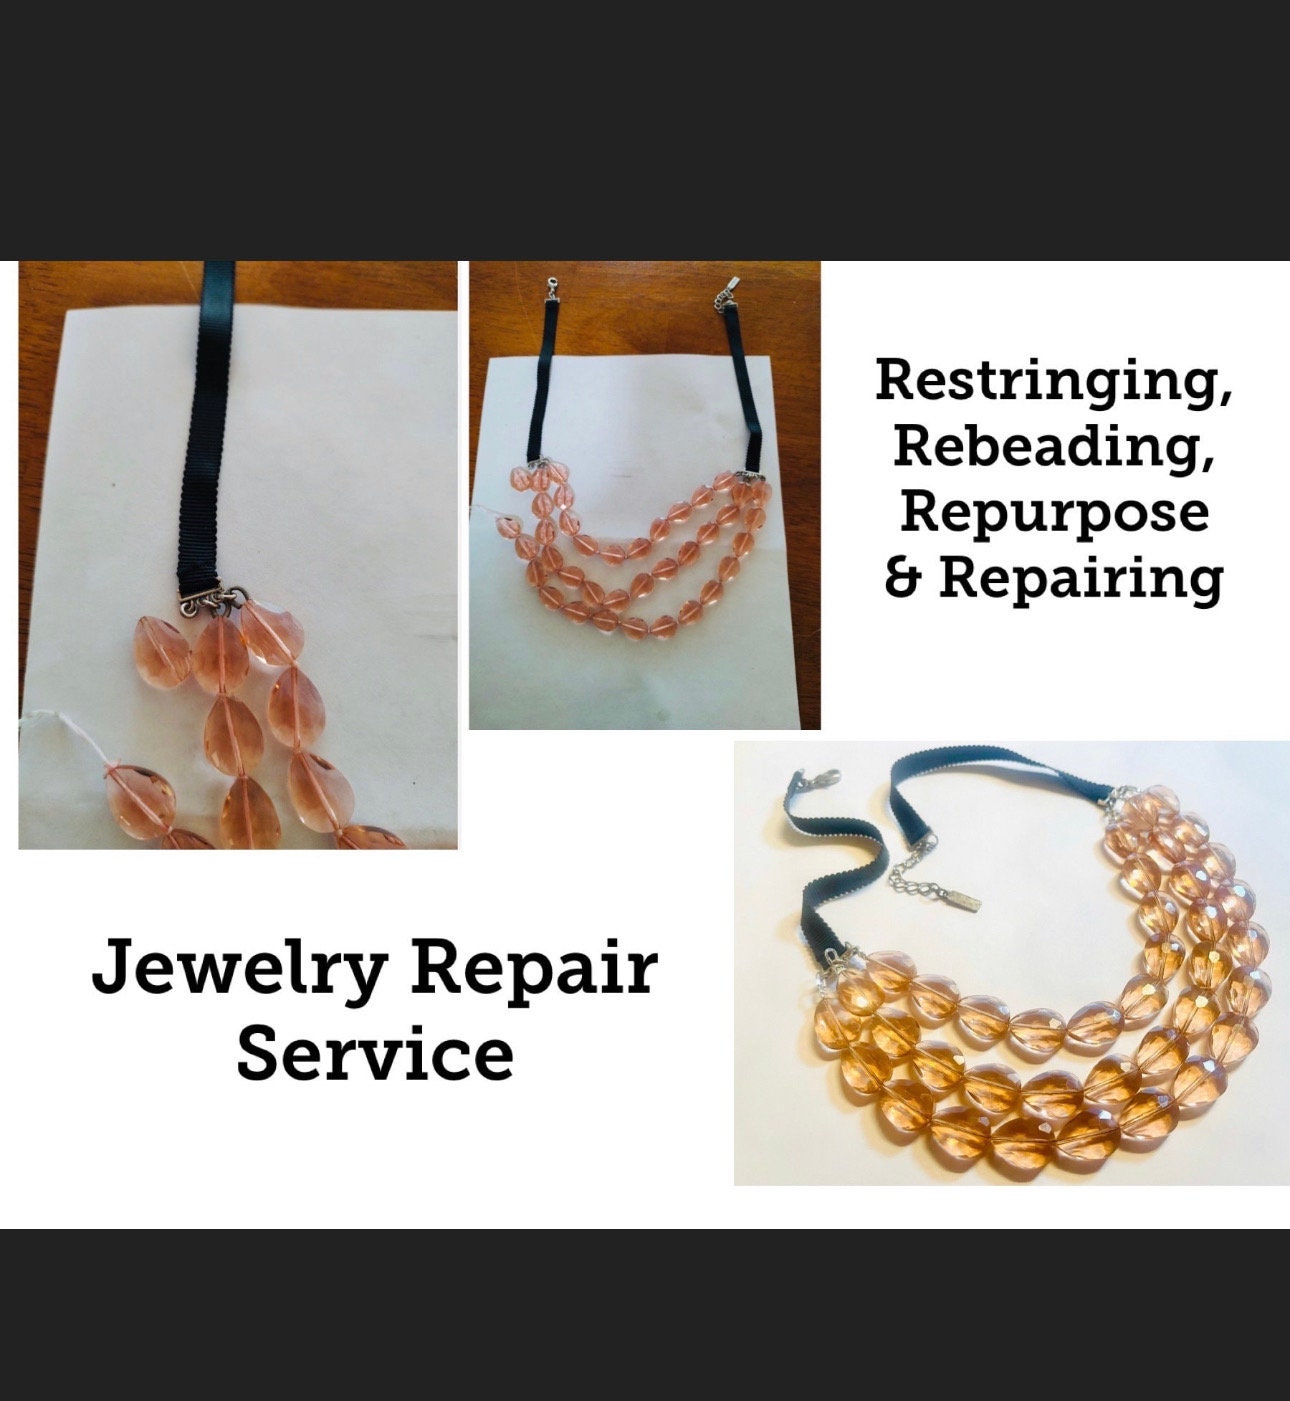 Squash Blossom Necklace Repair Kit With Instructions Free Shipping 